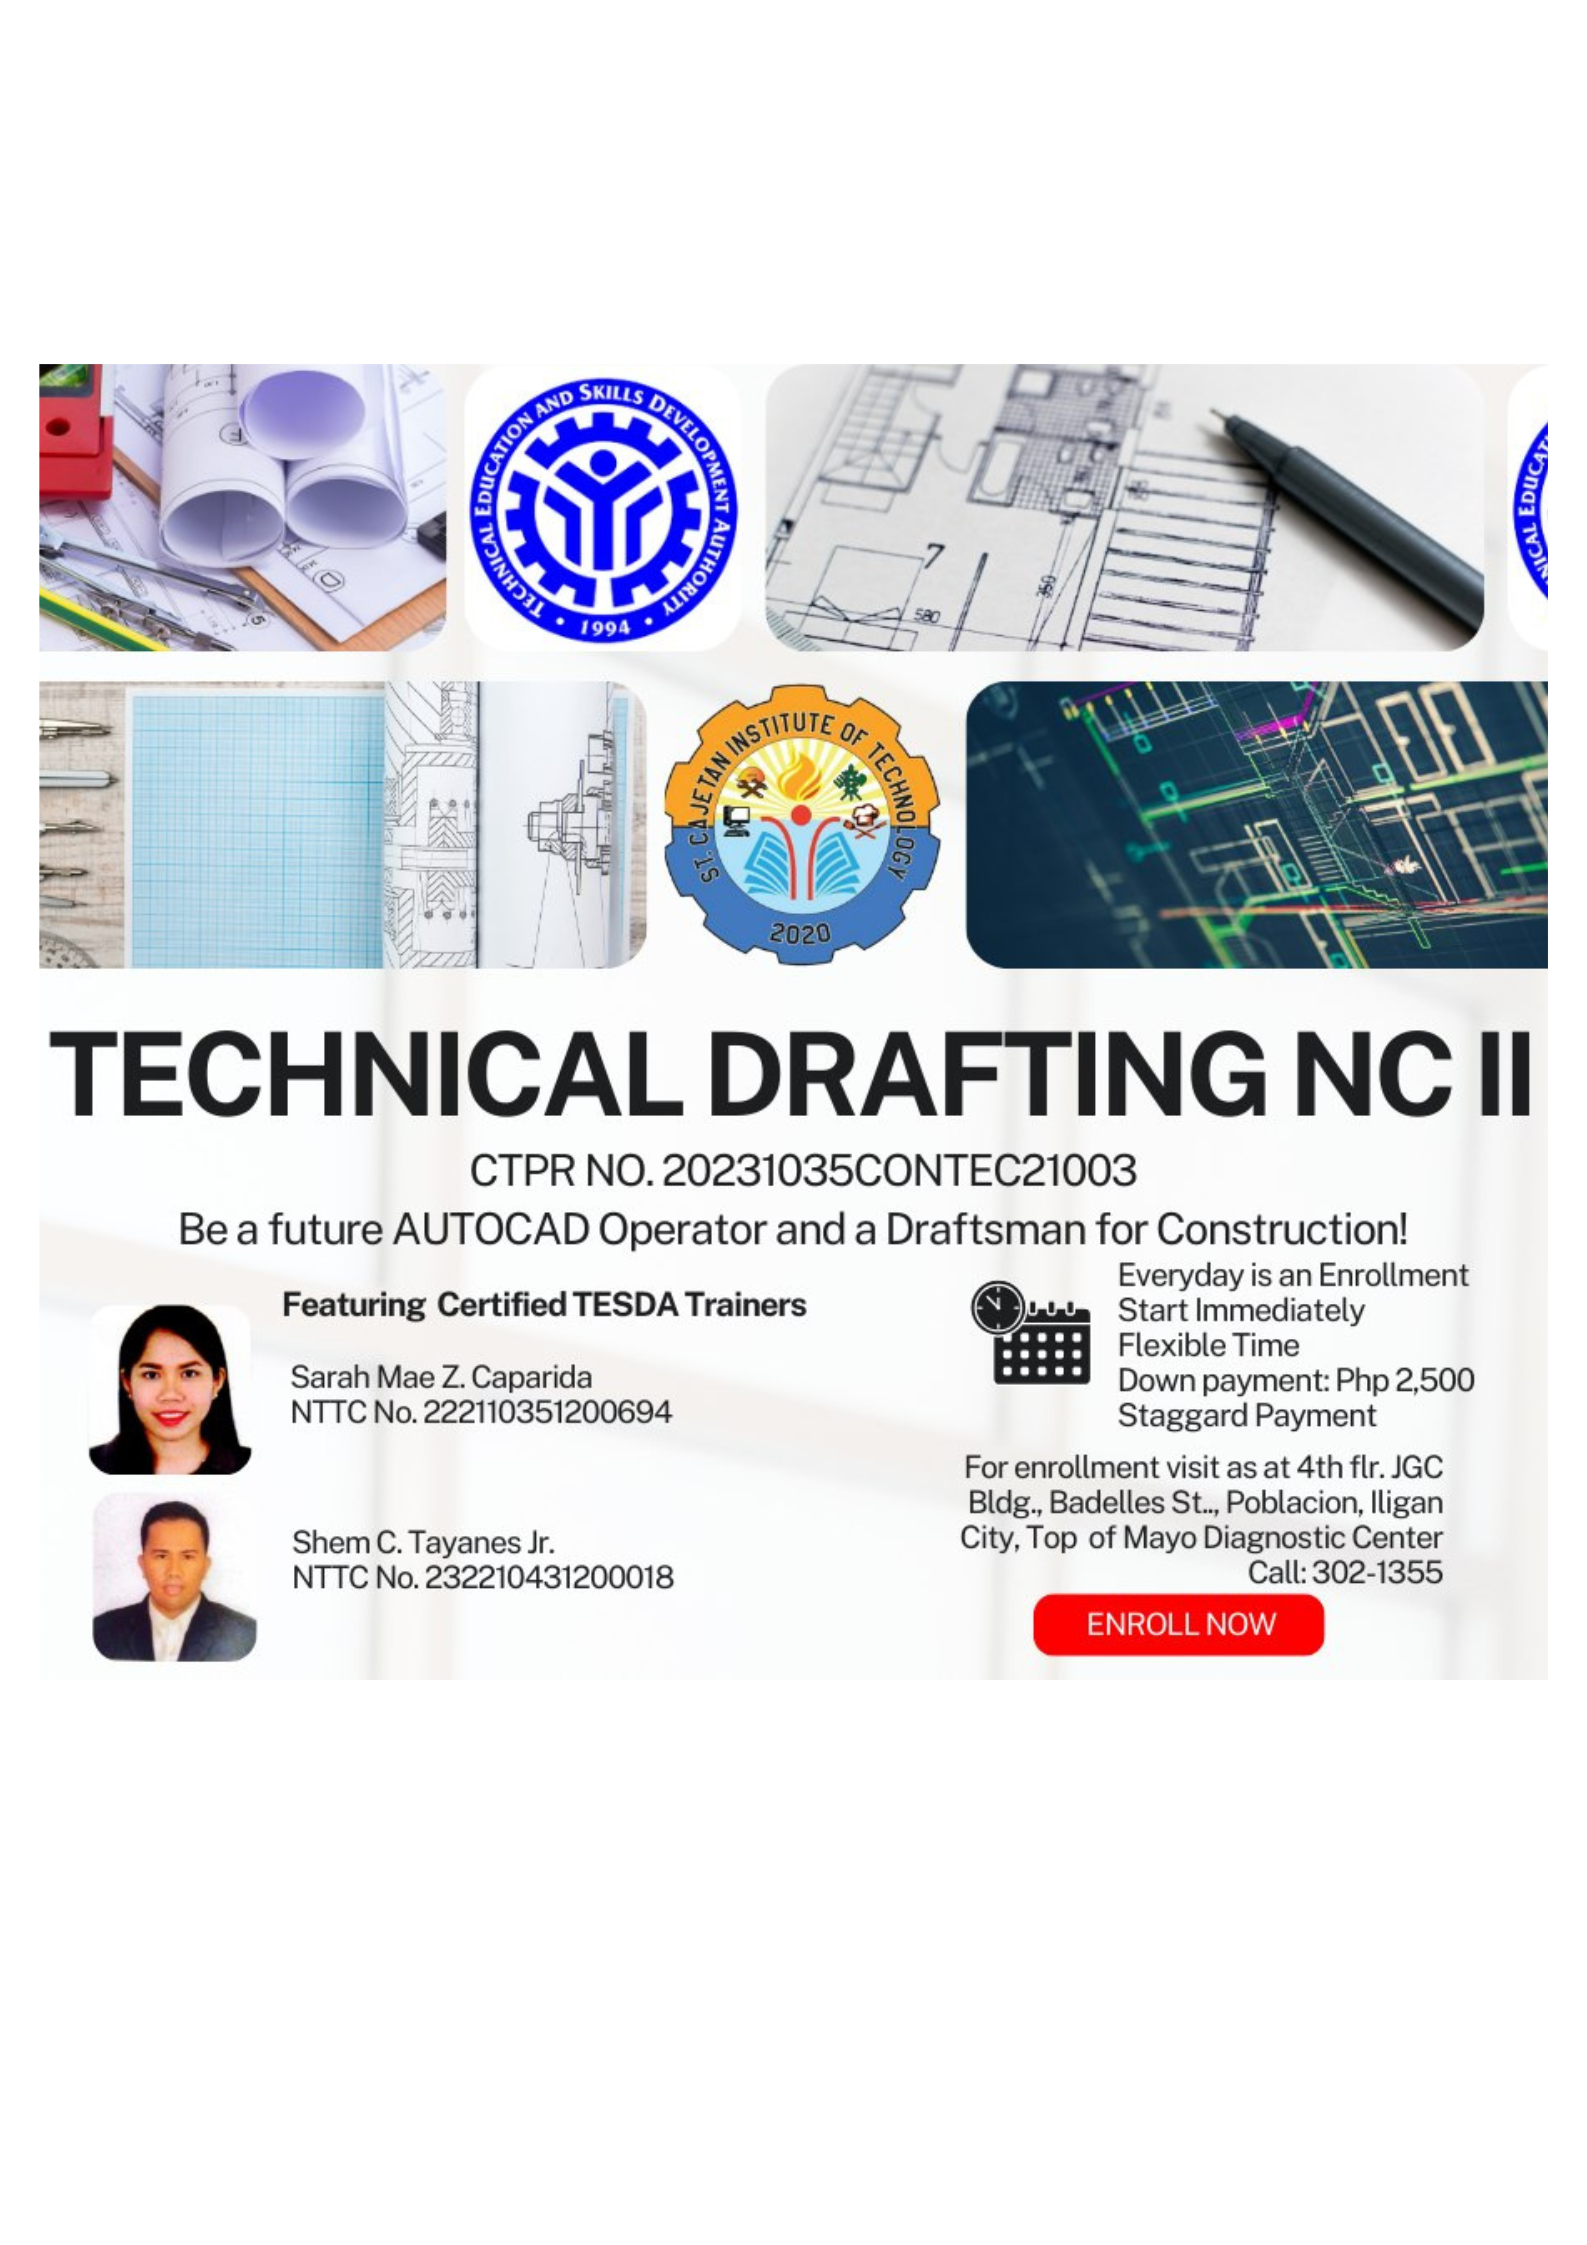  Join Our Technical Drafting NC II Program! Enroll Any Day, Any Time! 